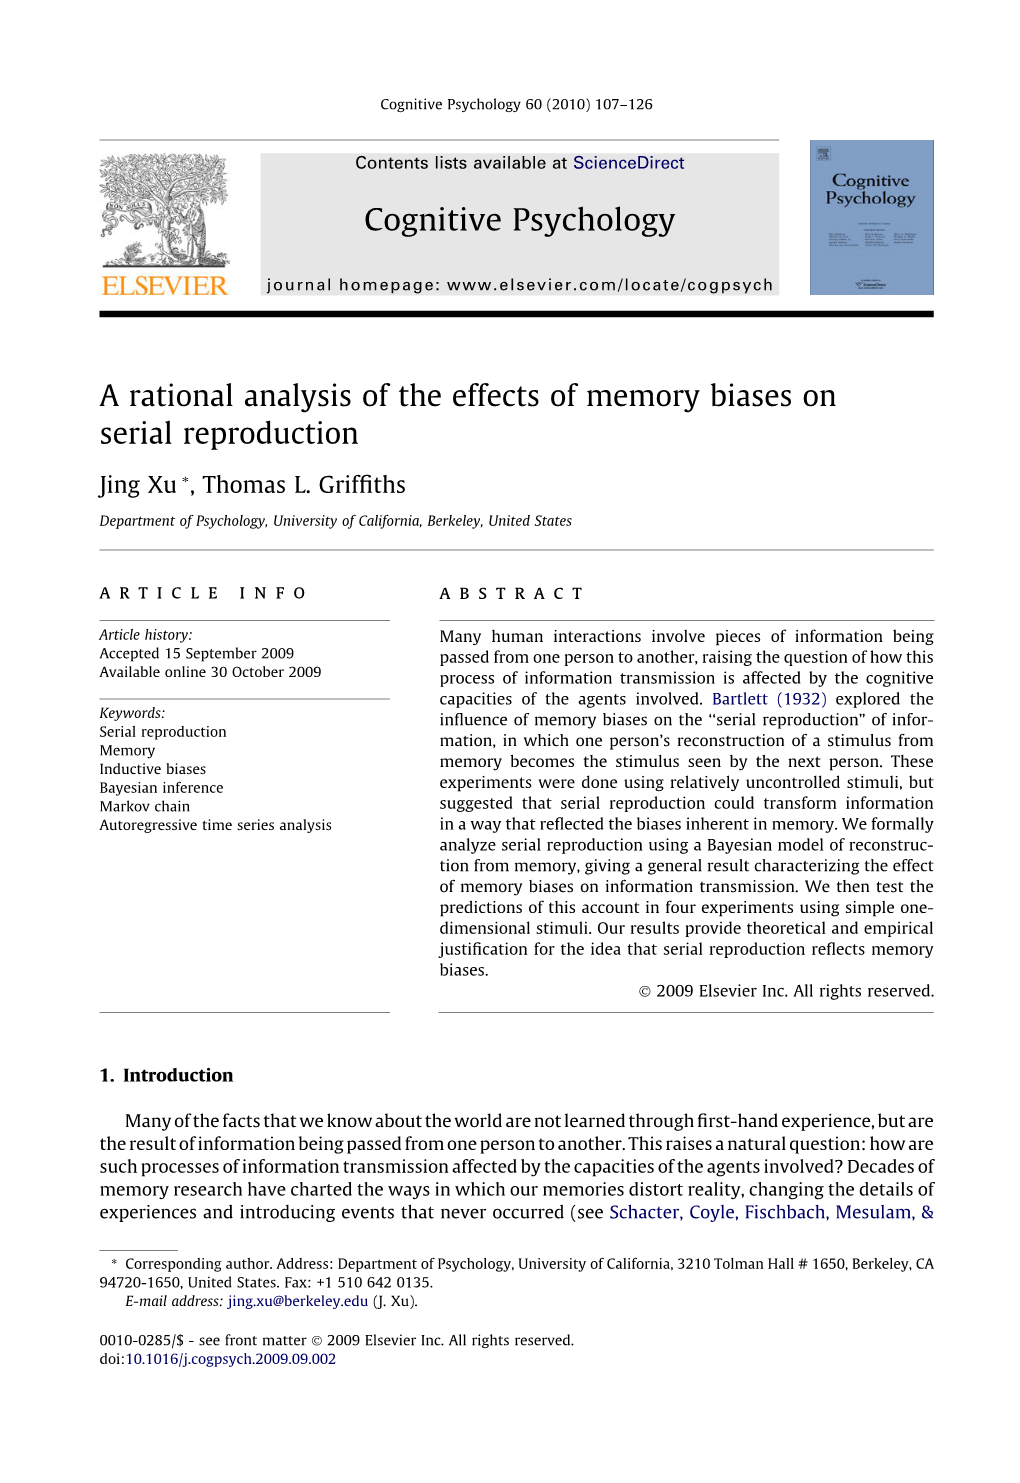 A Rational Analysis of the Effects of Memory Biases on Serial Reproduction